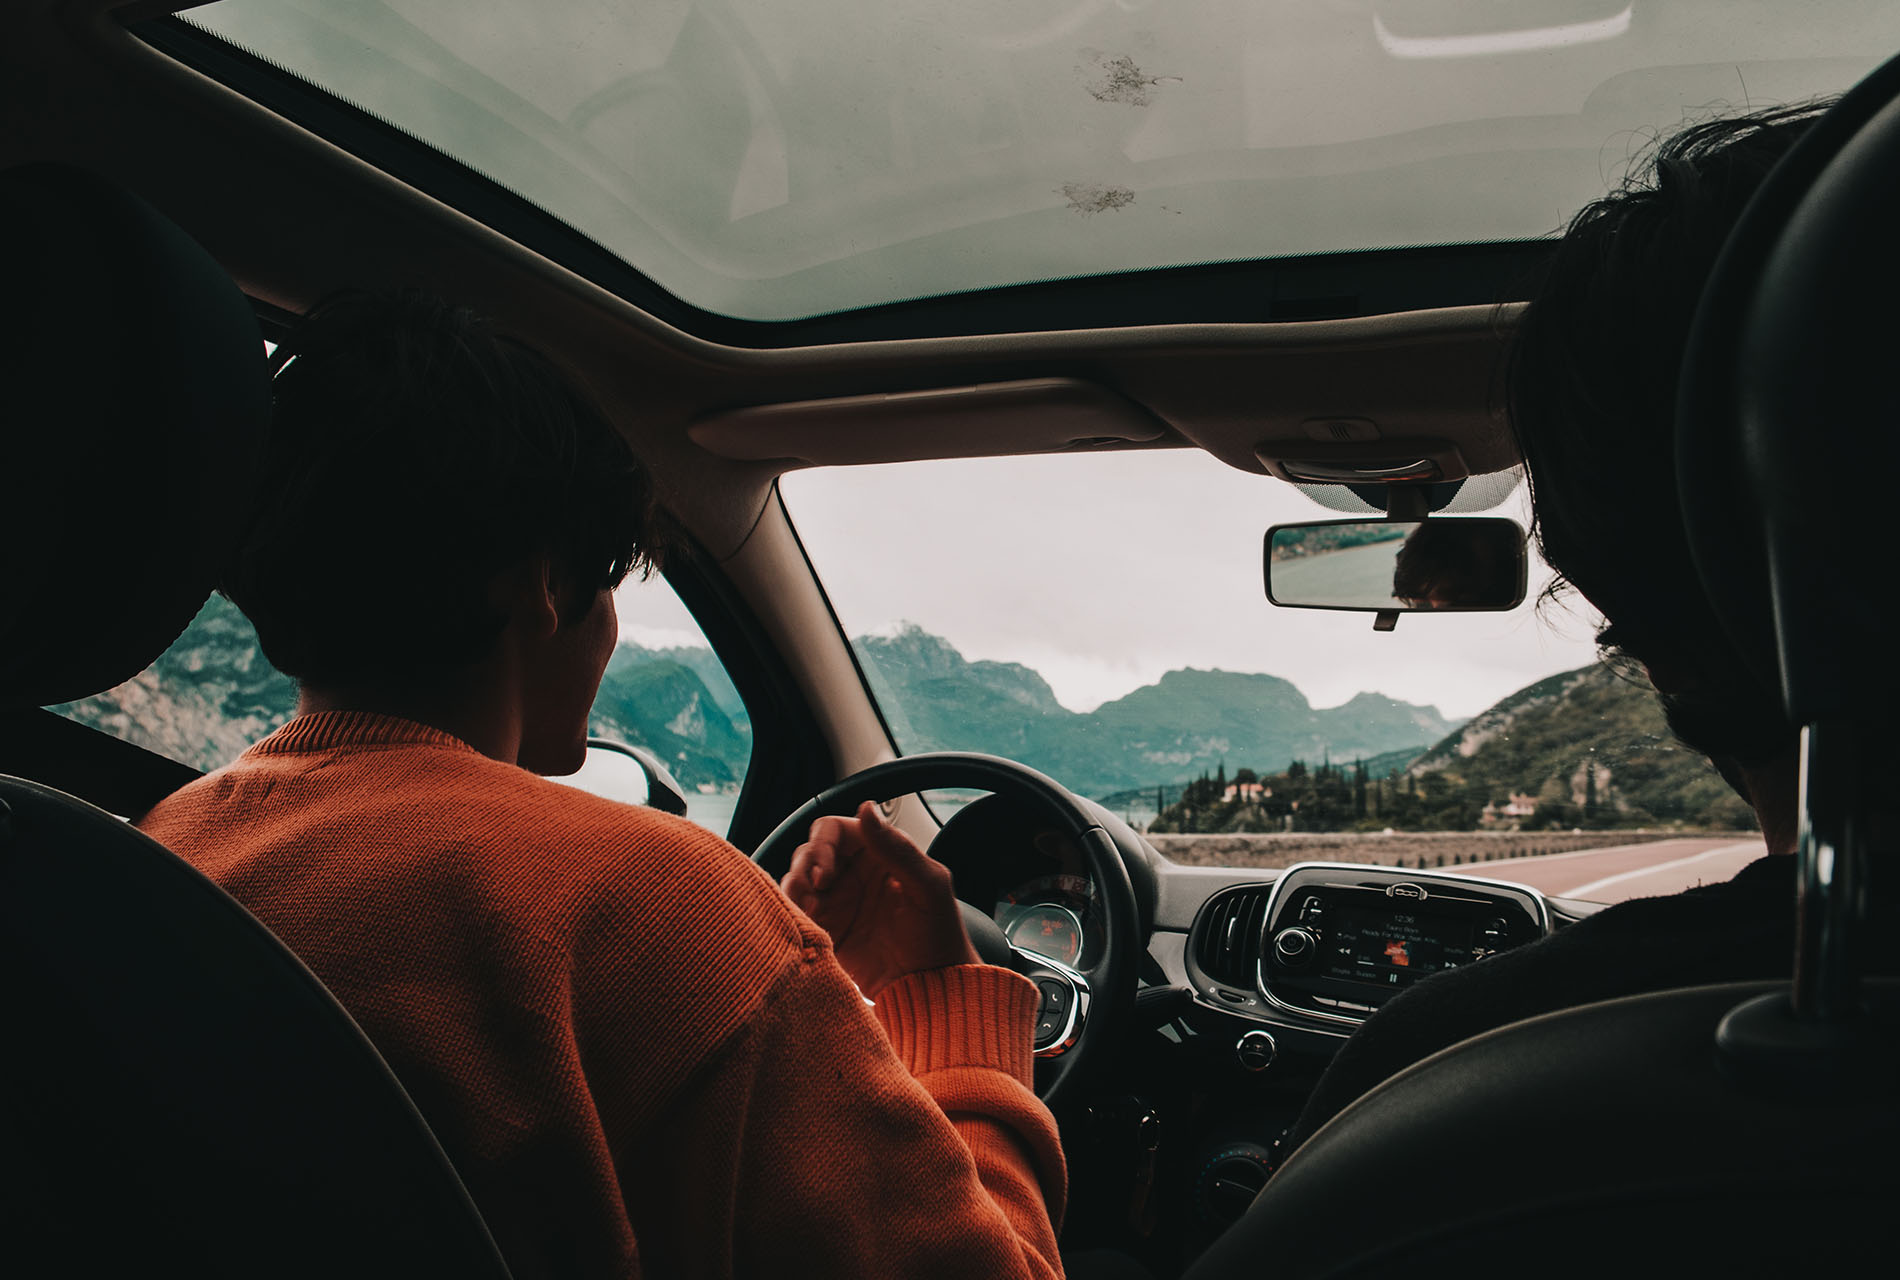 An image of a person driving a car in an orange sweater, taken from behind.